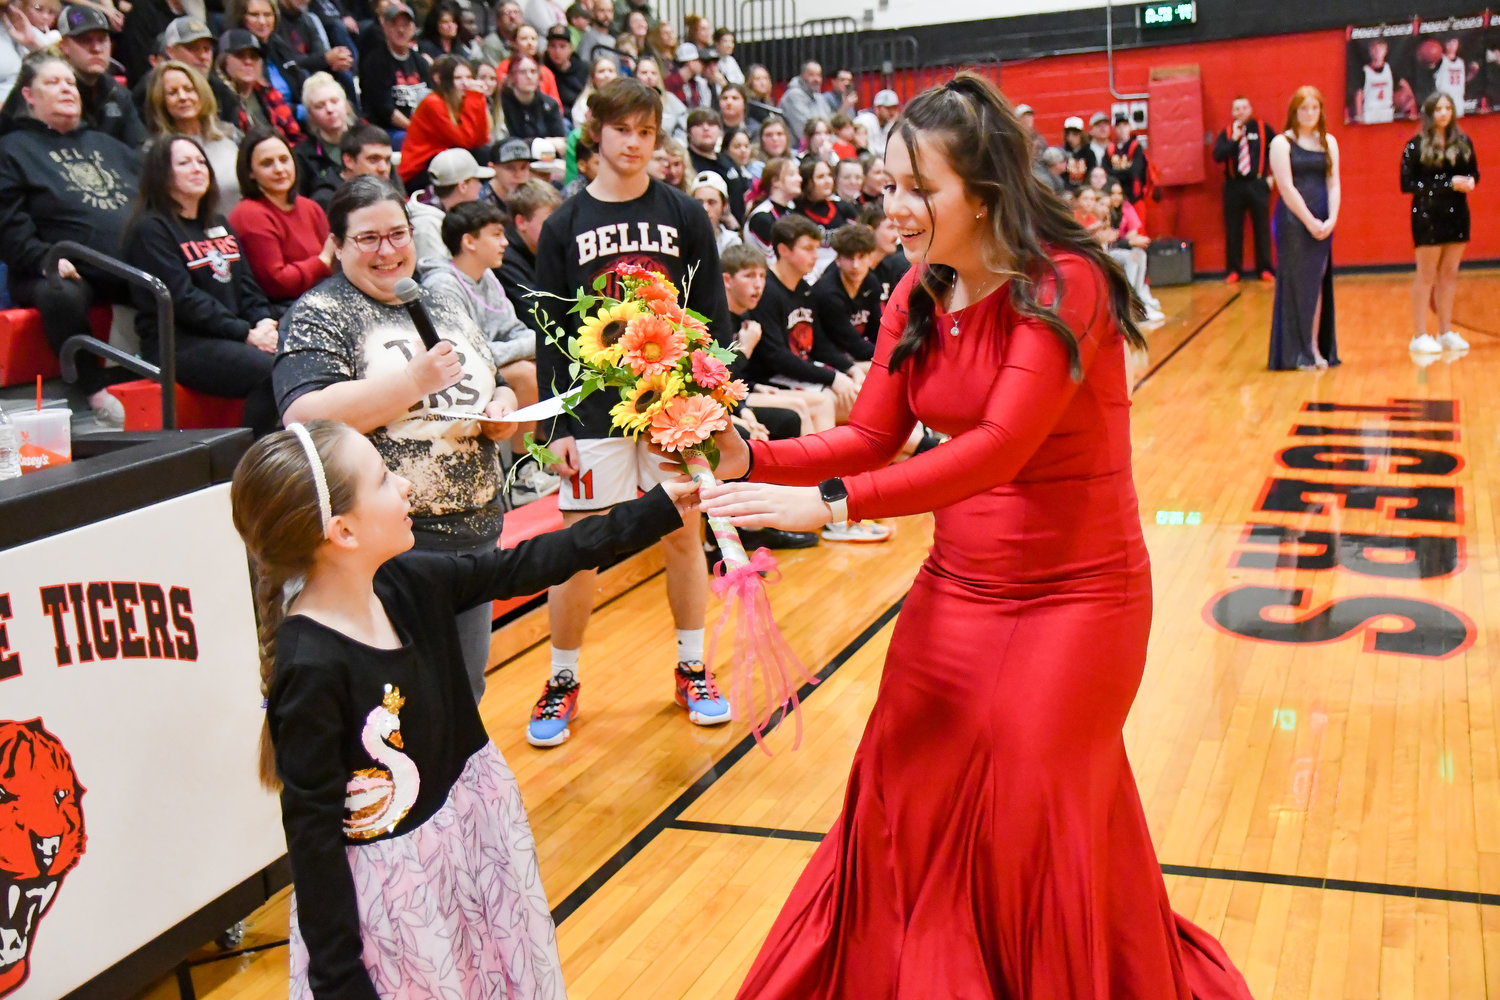 Homecoming Queen Ryleigh Long accepts flowers after being announced queen.